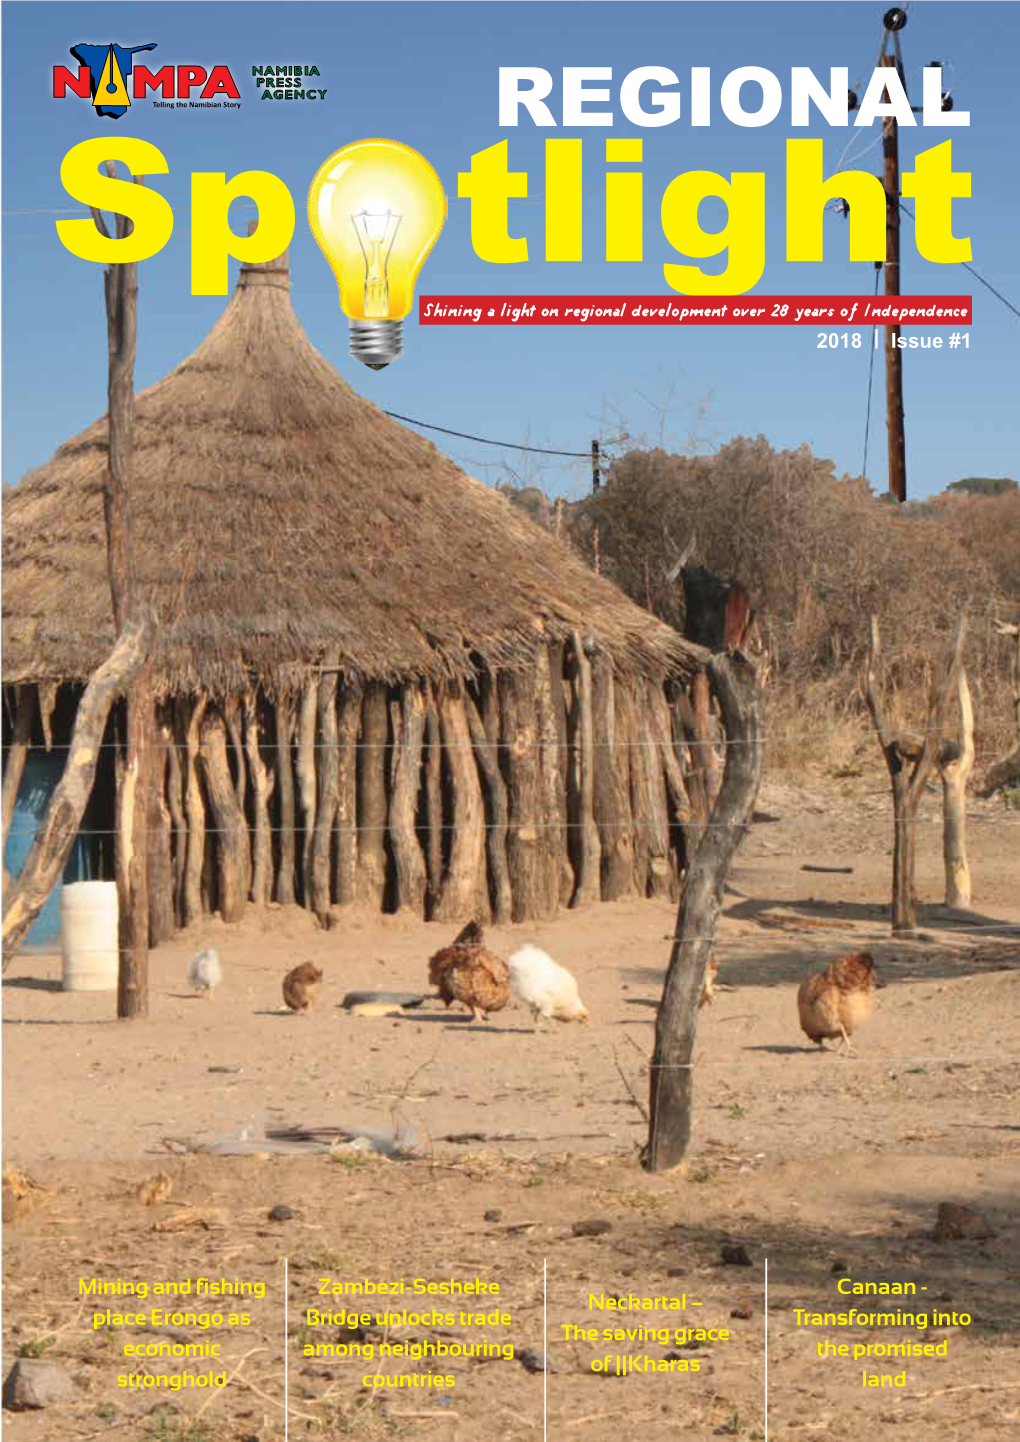 REGIONAL Sp Tlight Shining a Light on Regional Development Over 28 Years of Independence 2018 | Issue #1